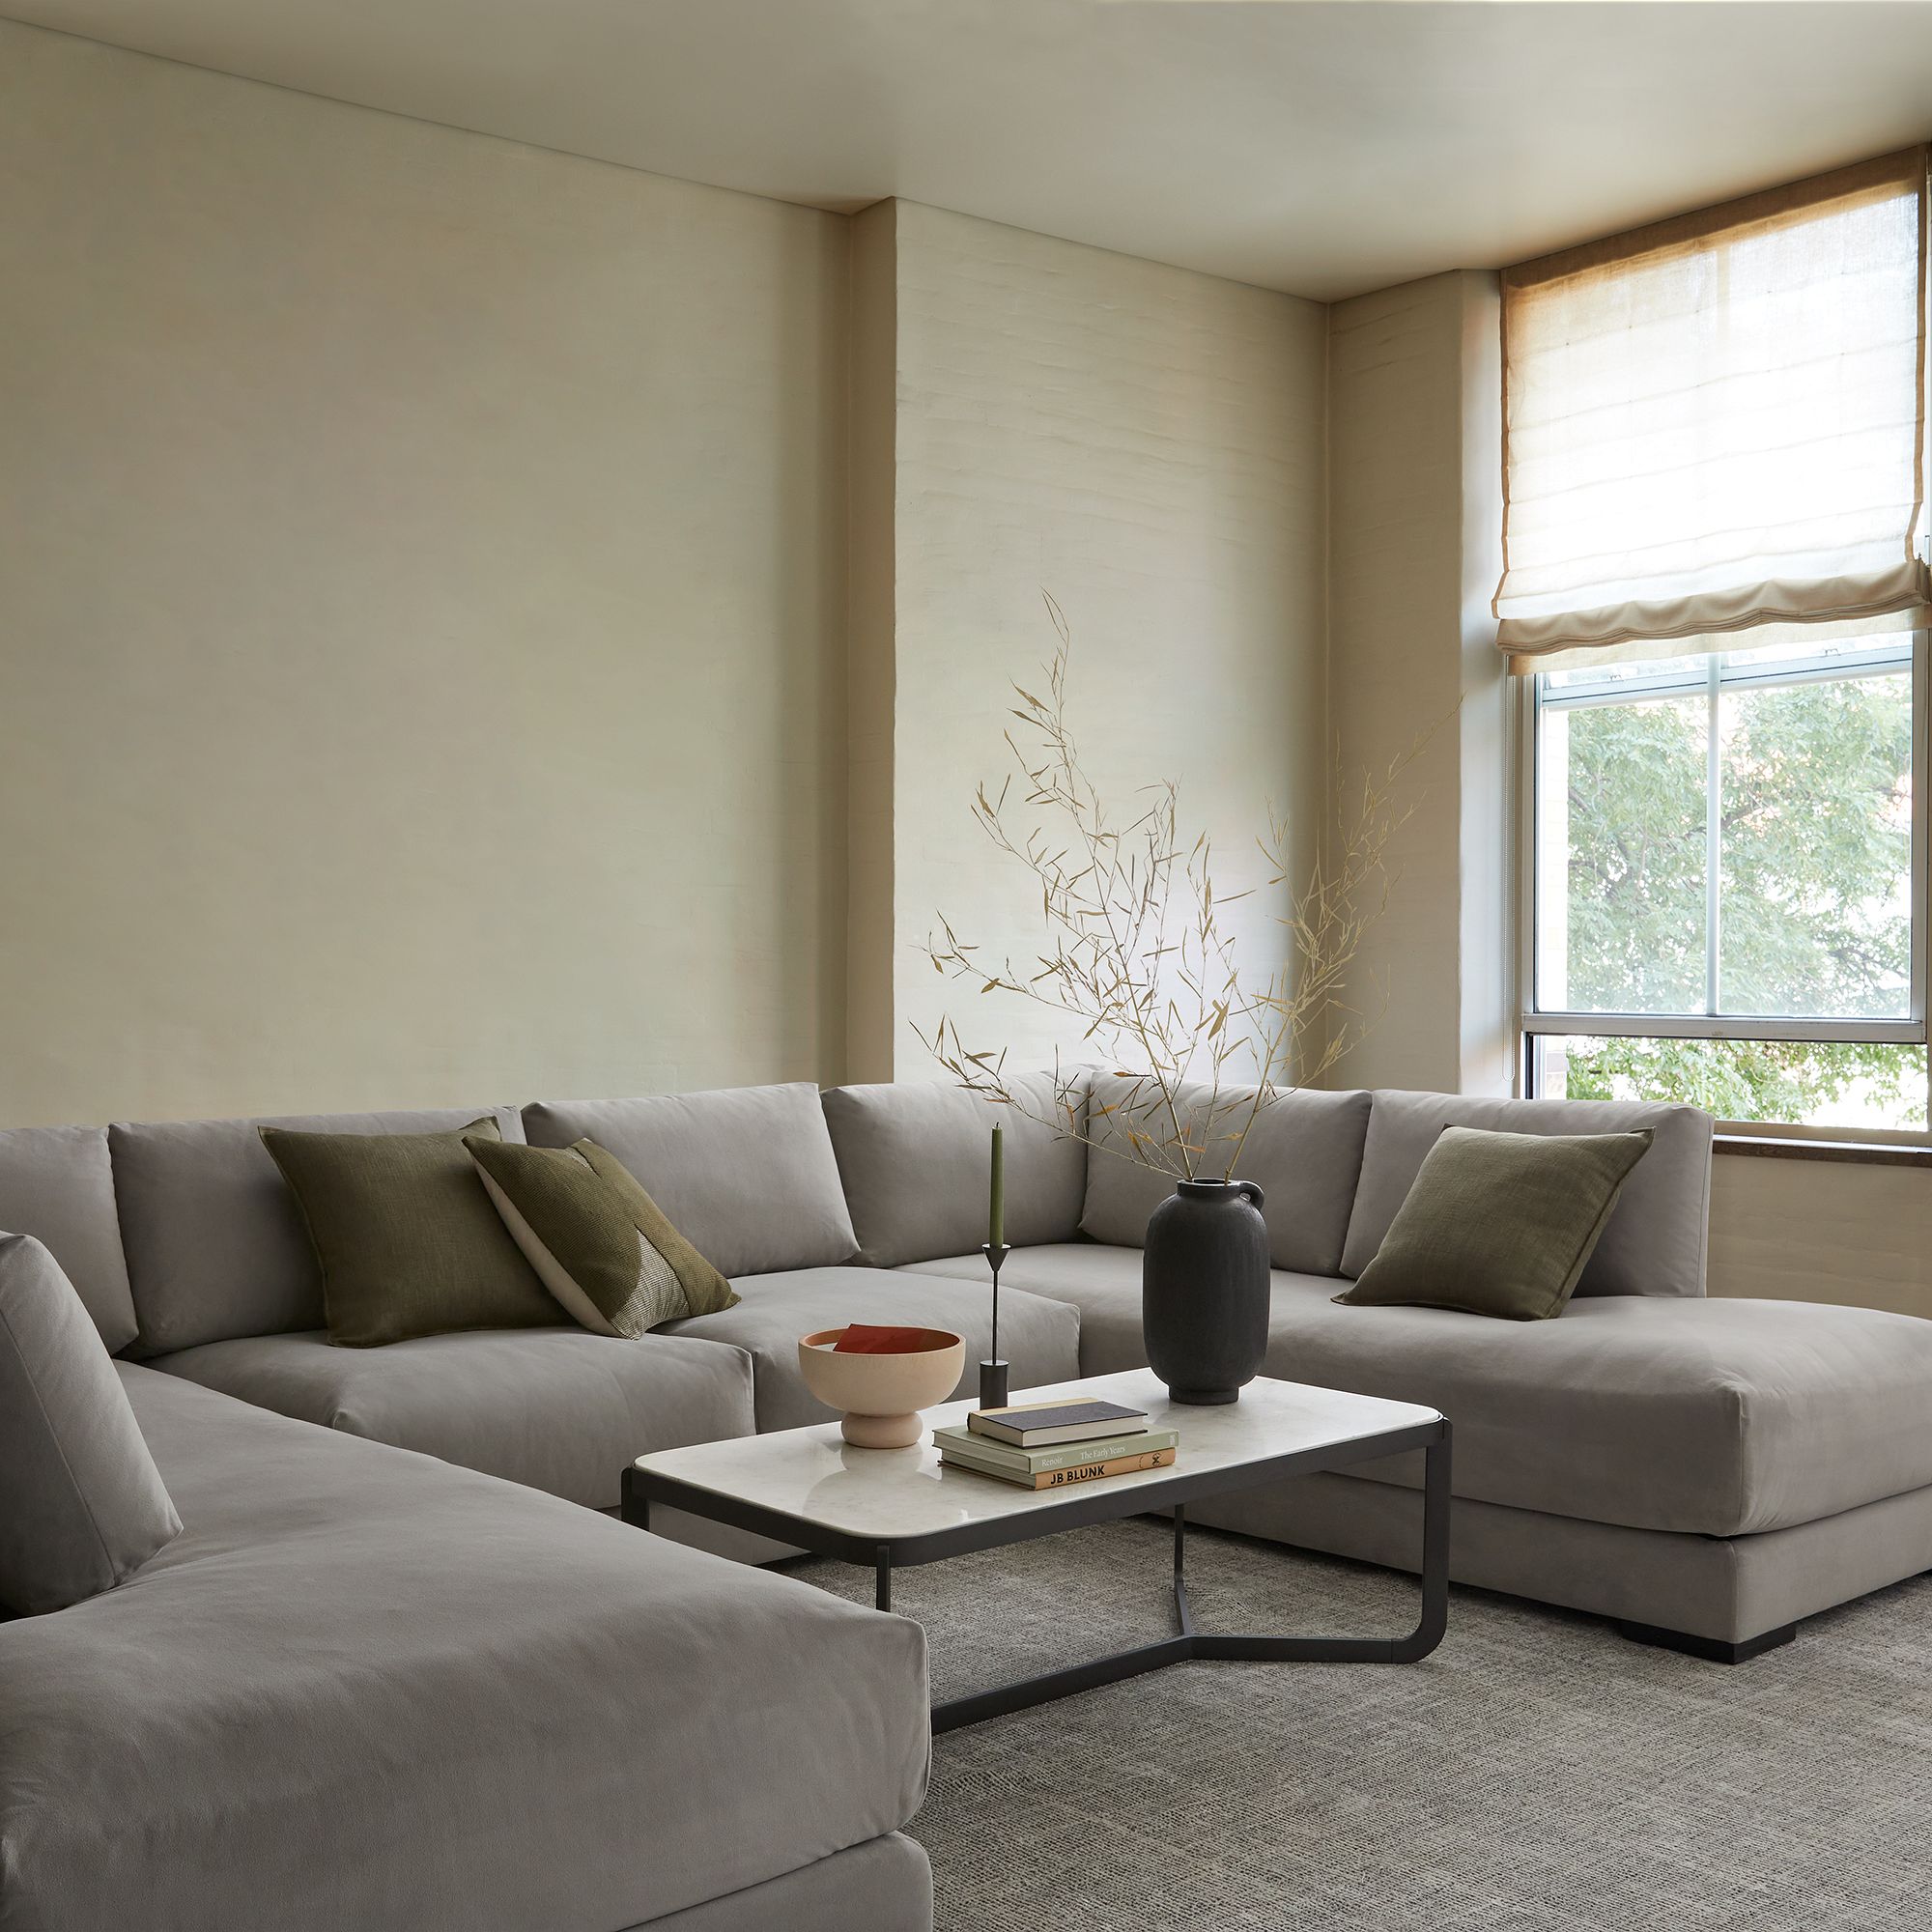 A gray sectional couch in a styled interior.